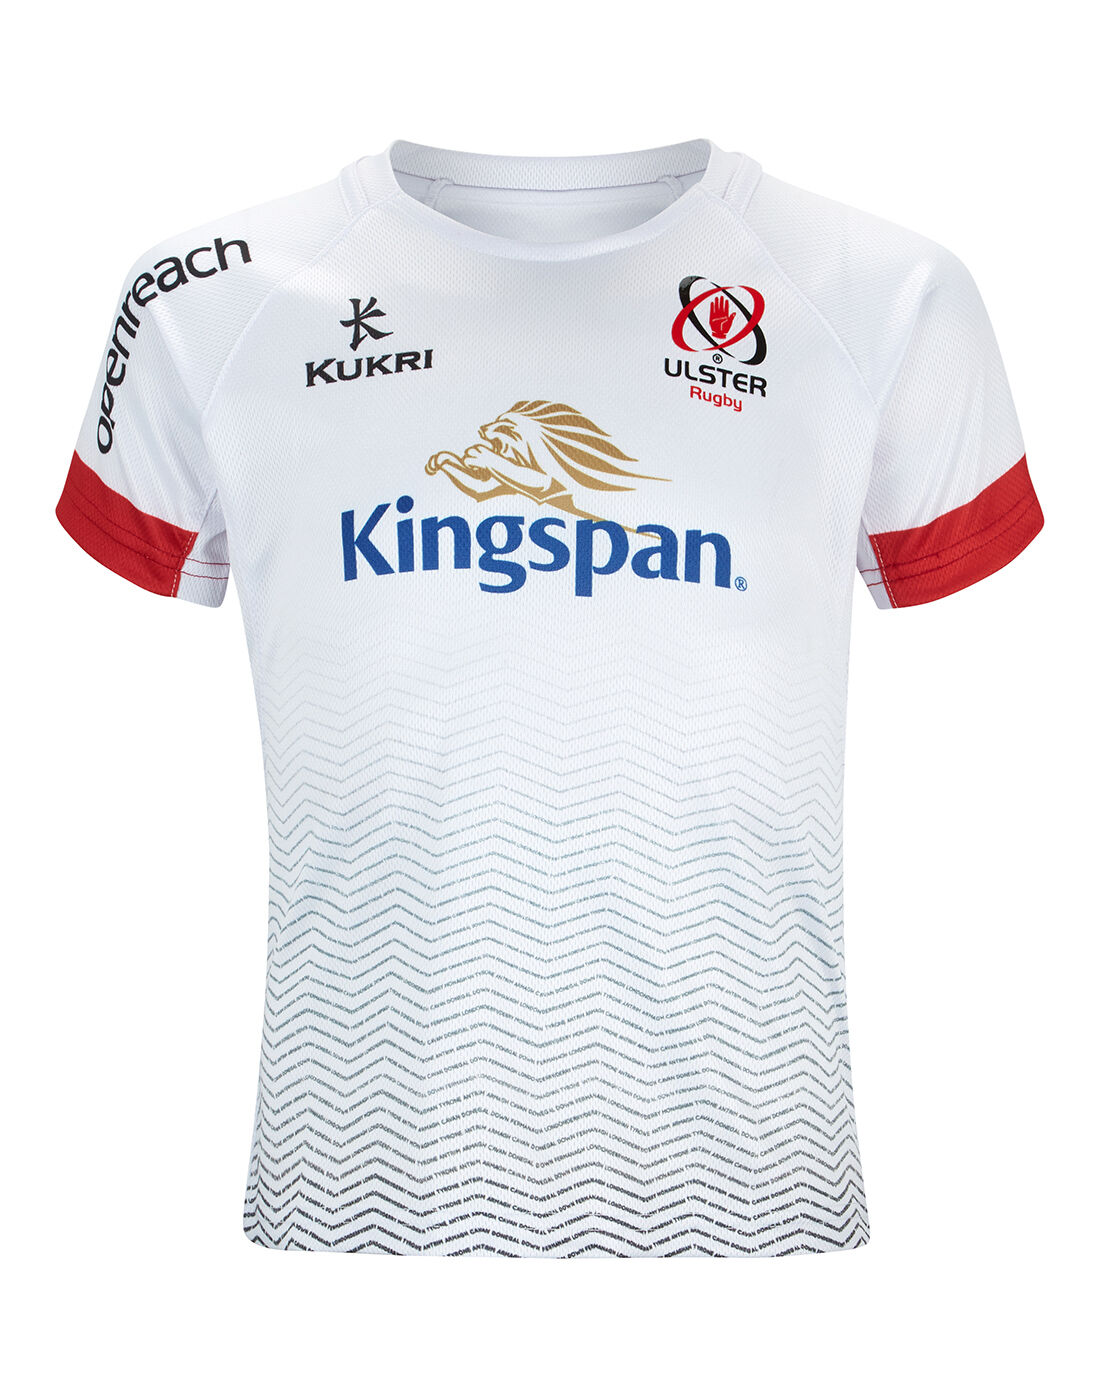 ulster rugby online shop